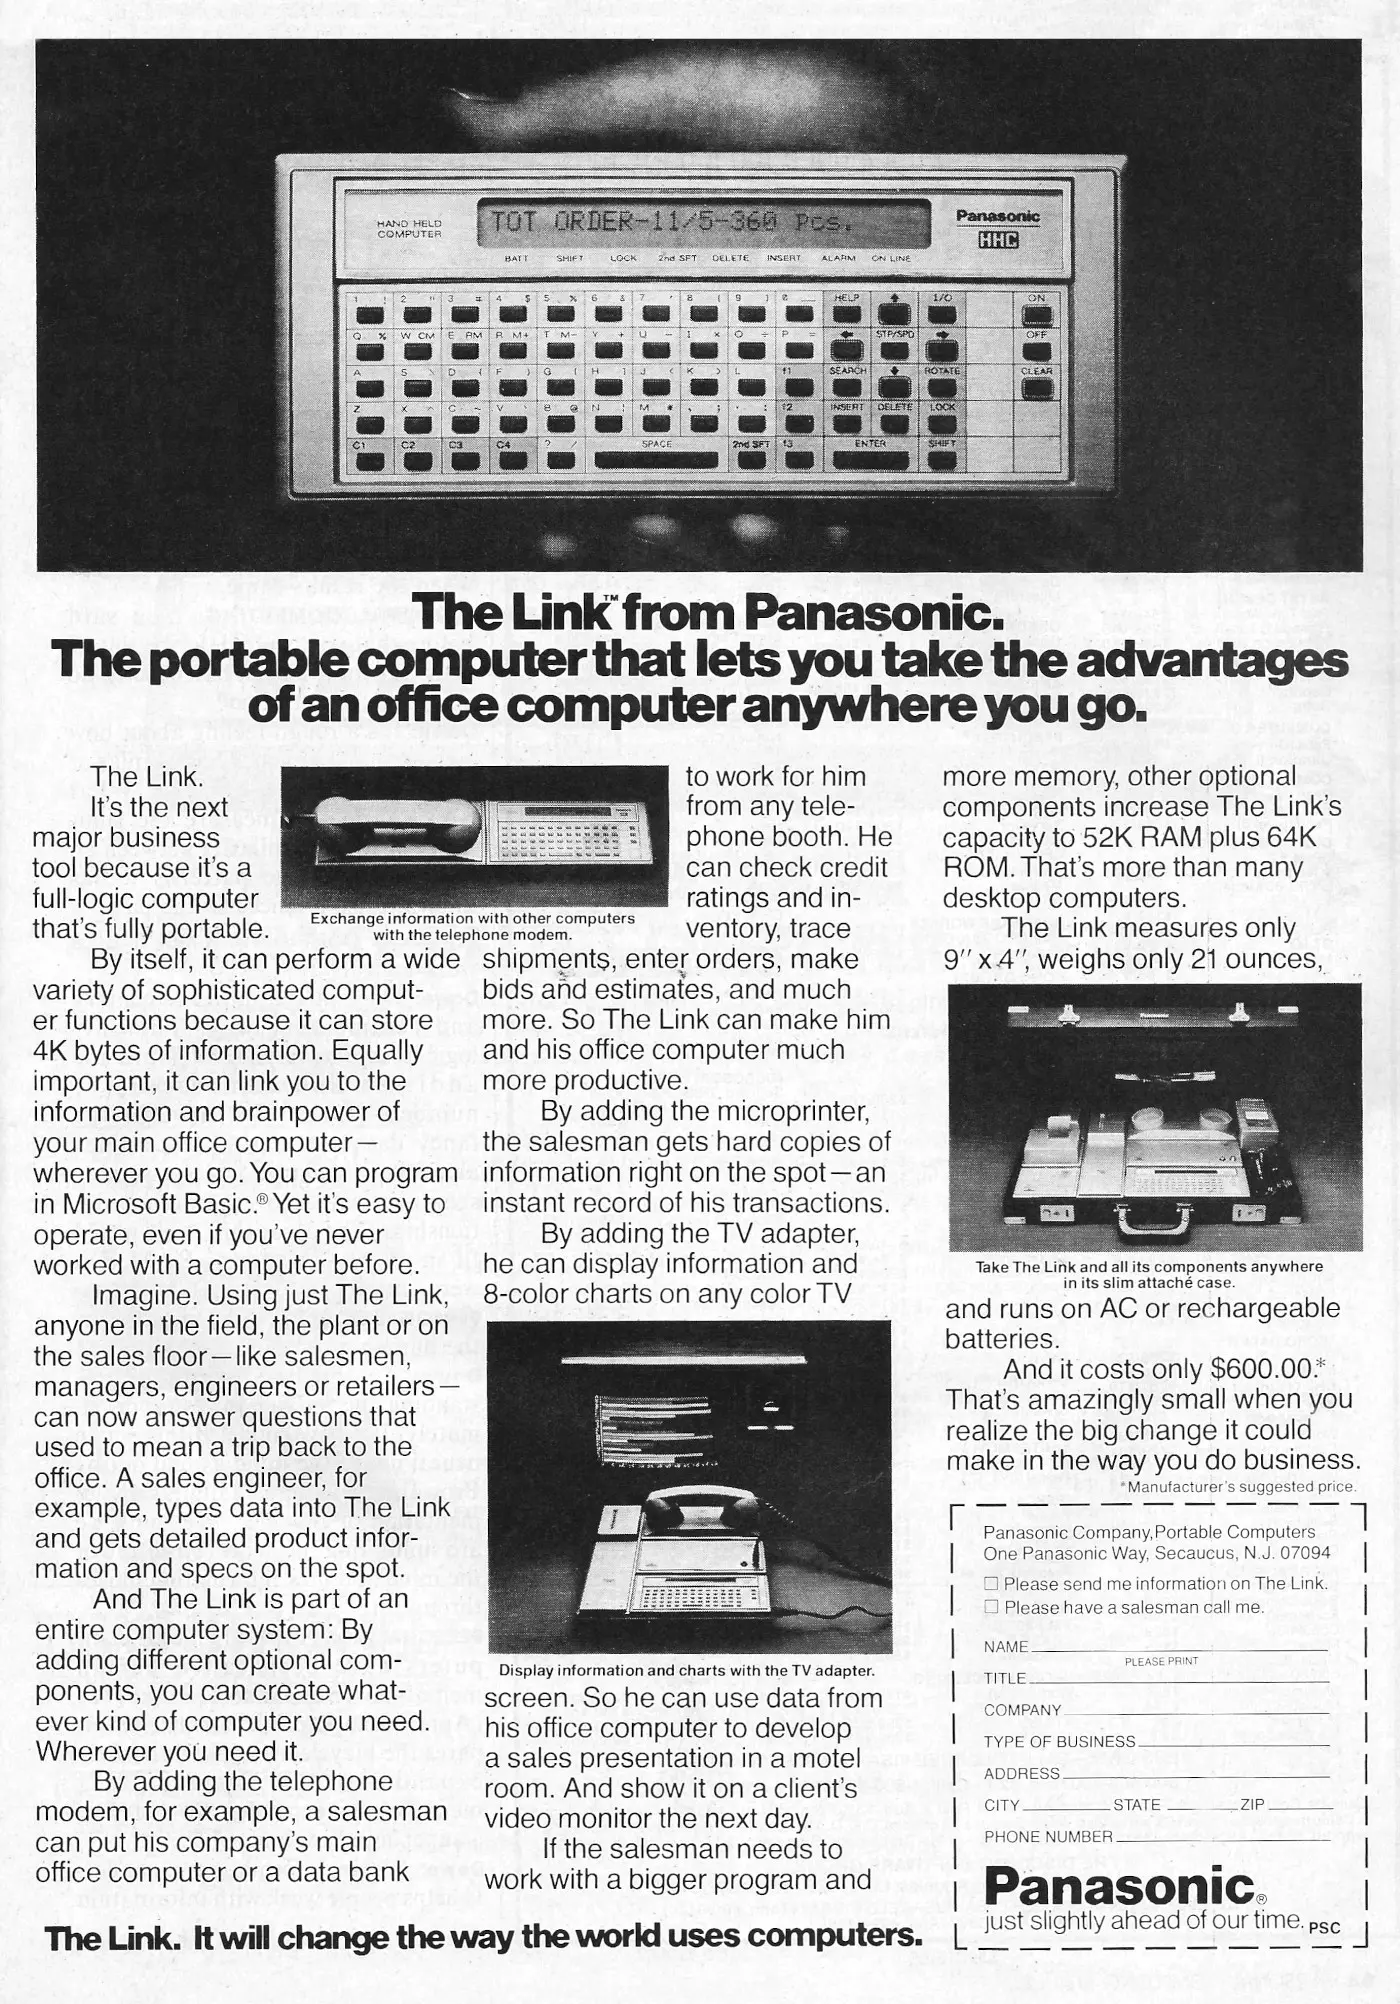 Panasonic Advert: The Link from Panasonic. The portable computer that lets you take the advantages of an office computer anywhere you go., from Personal Computing, May 1982